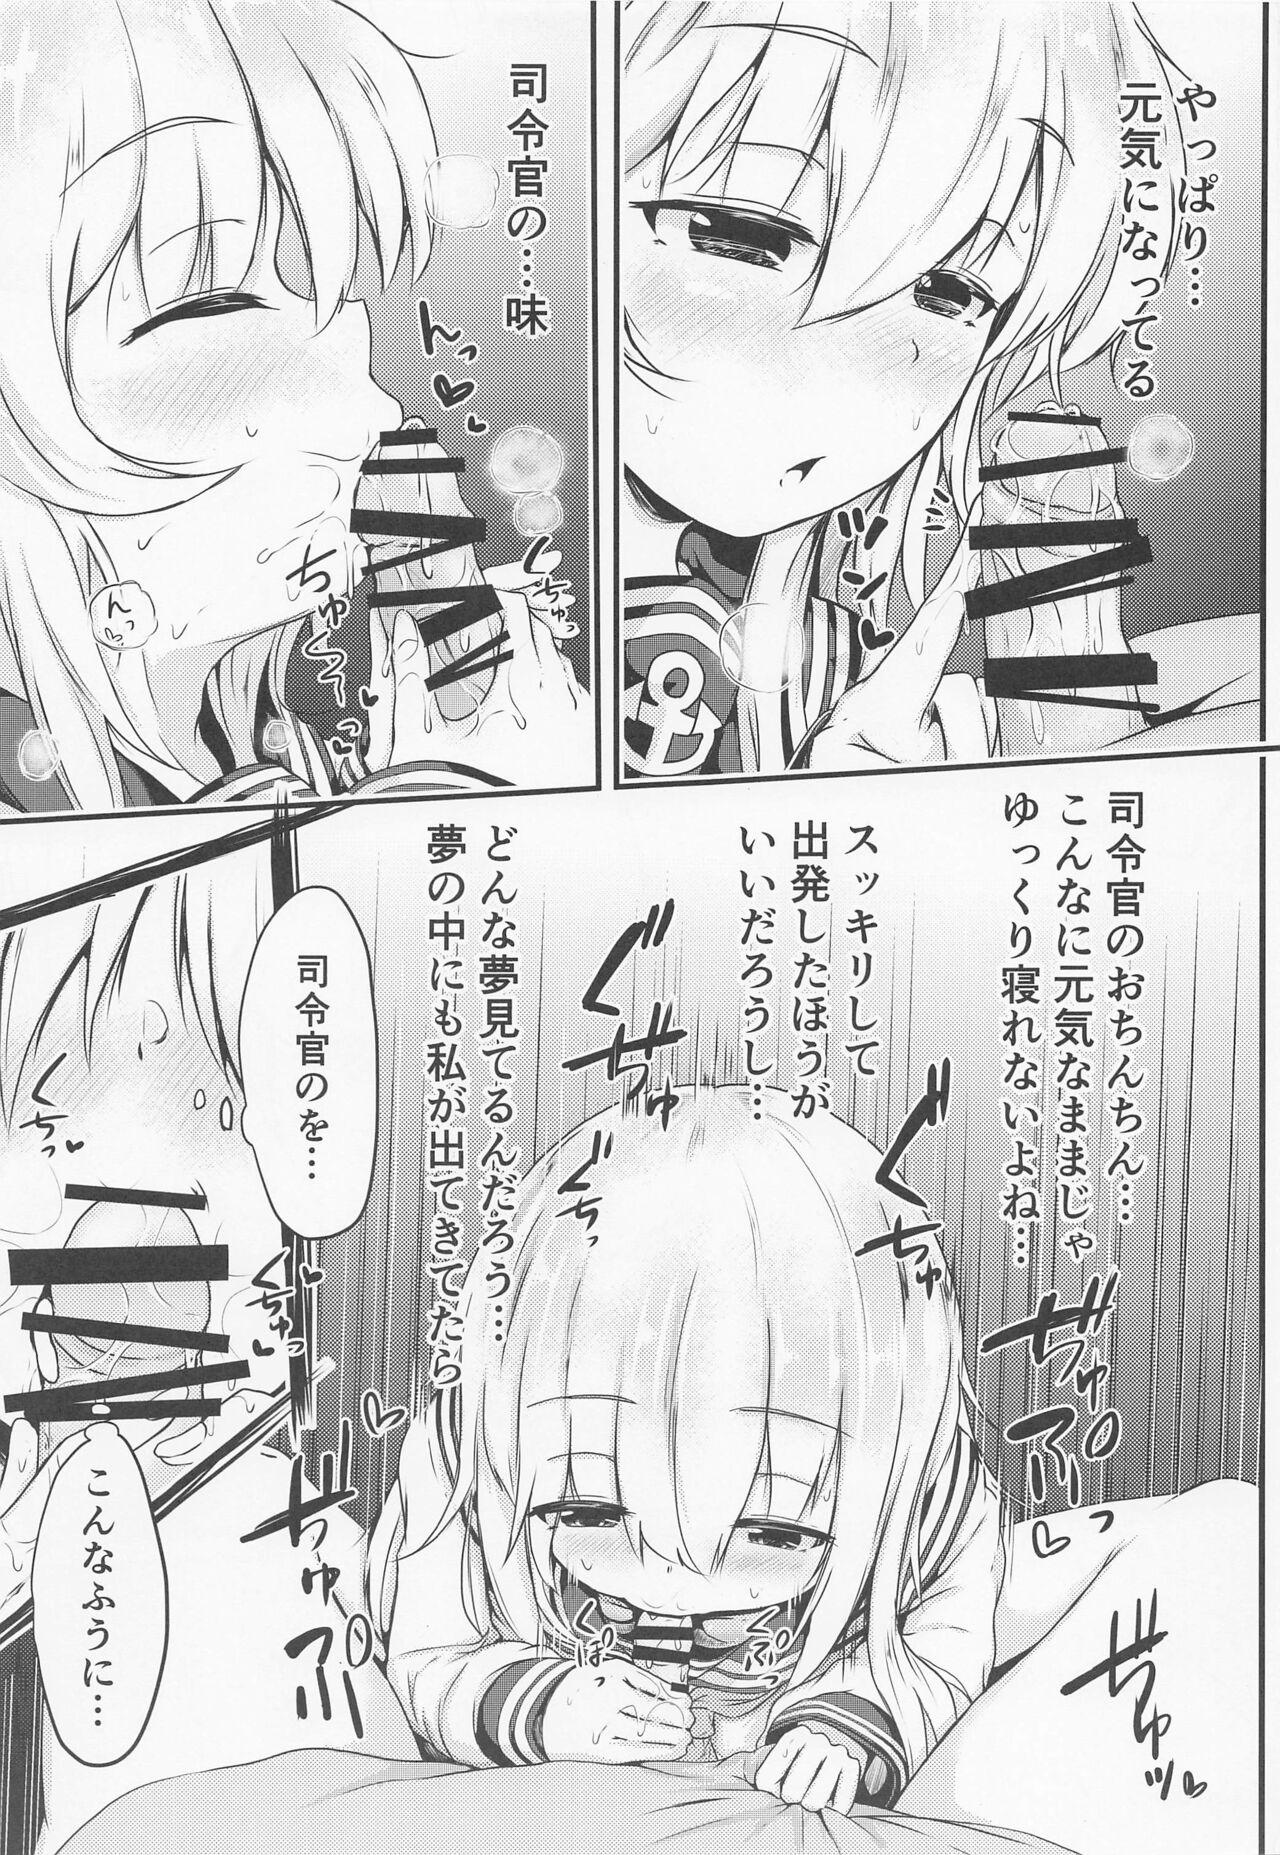 Amazing Hibiki datte Onee-chan 5 - Kantai collection Spy Camera - Page 10